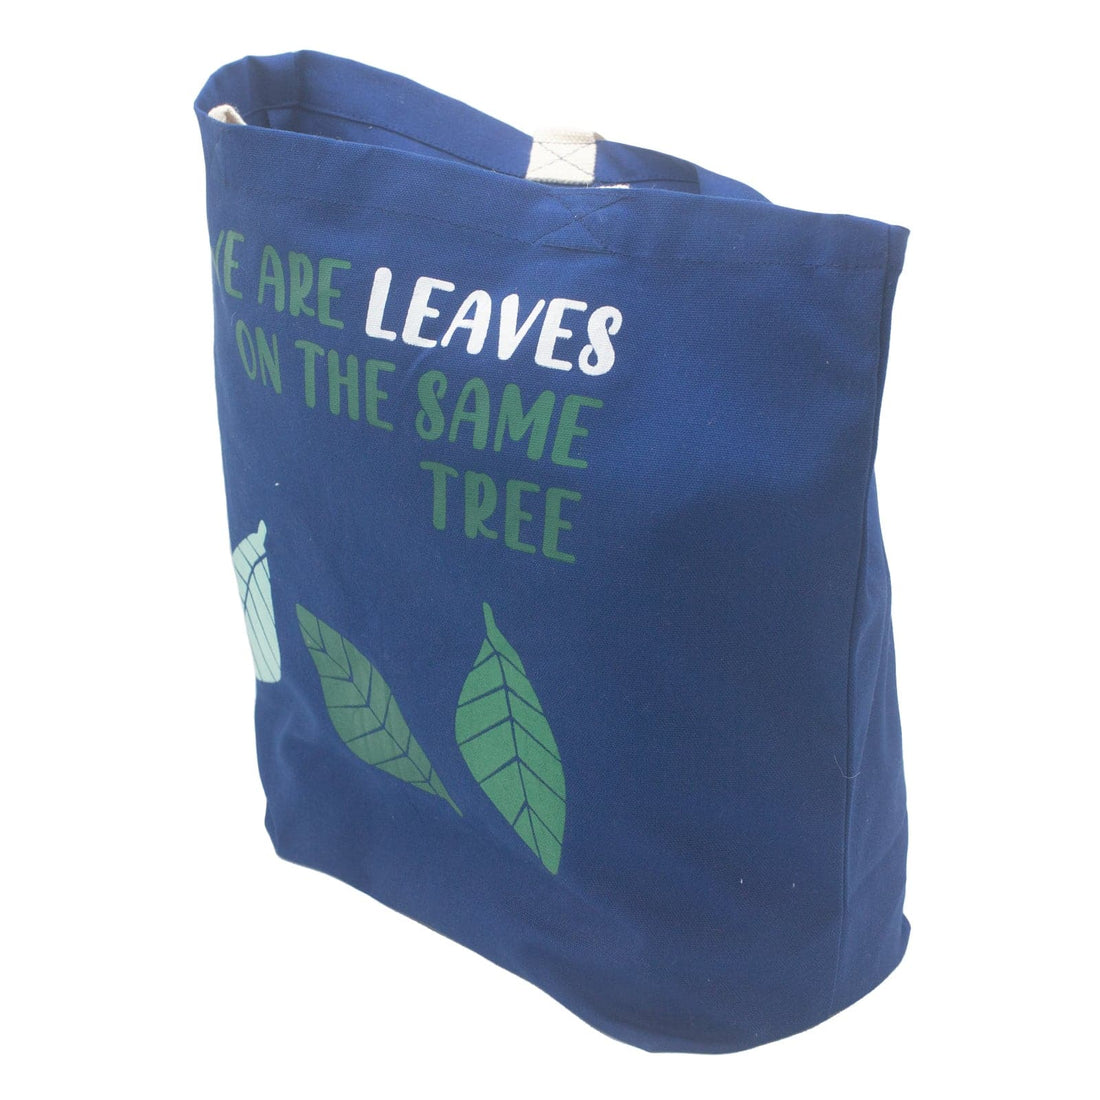 Printed Cotton Bag - We are Leaves - Blue - best price from Maltashopper.com PCB-02B